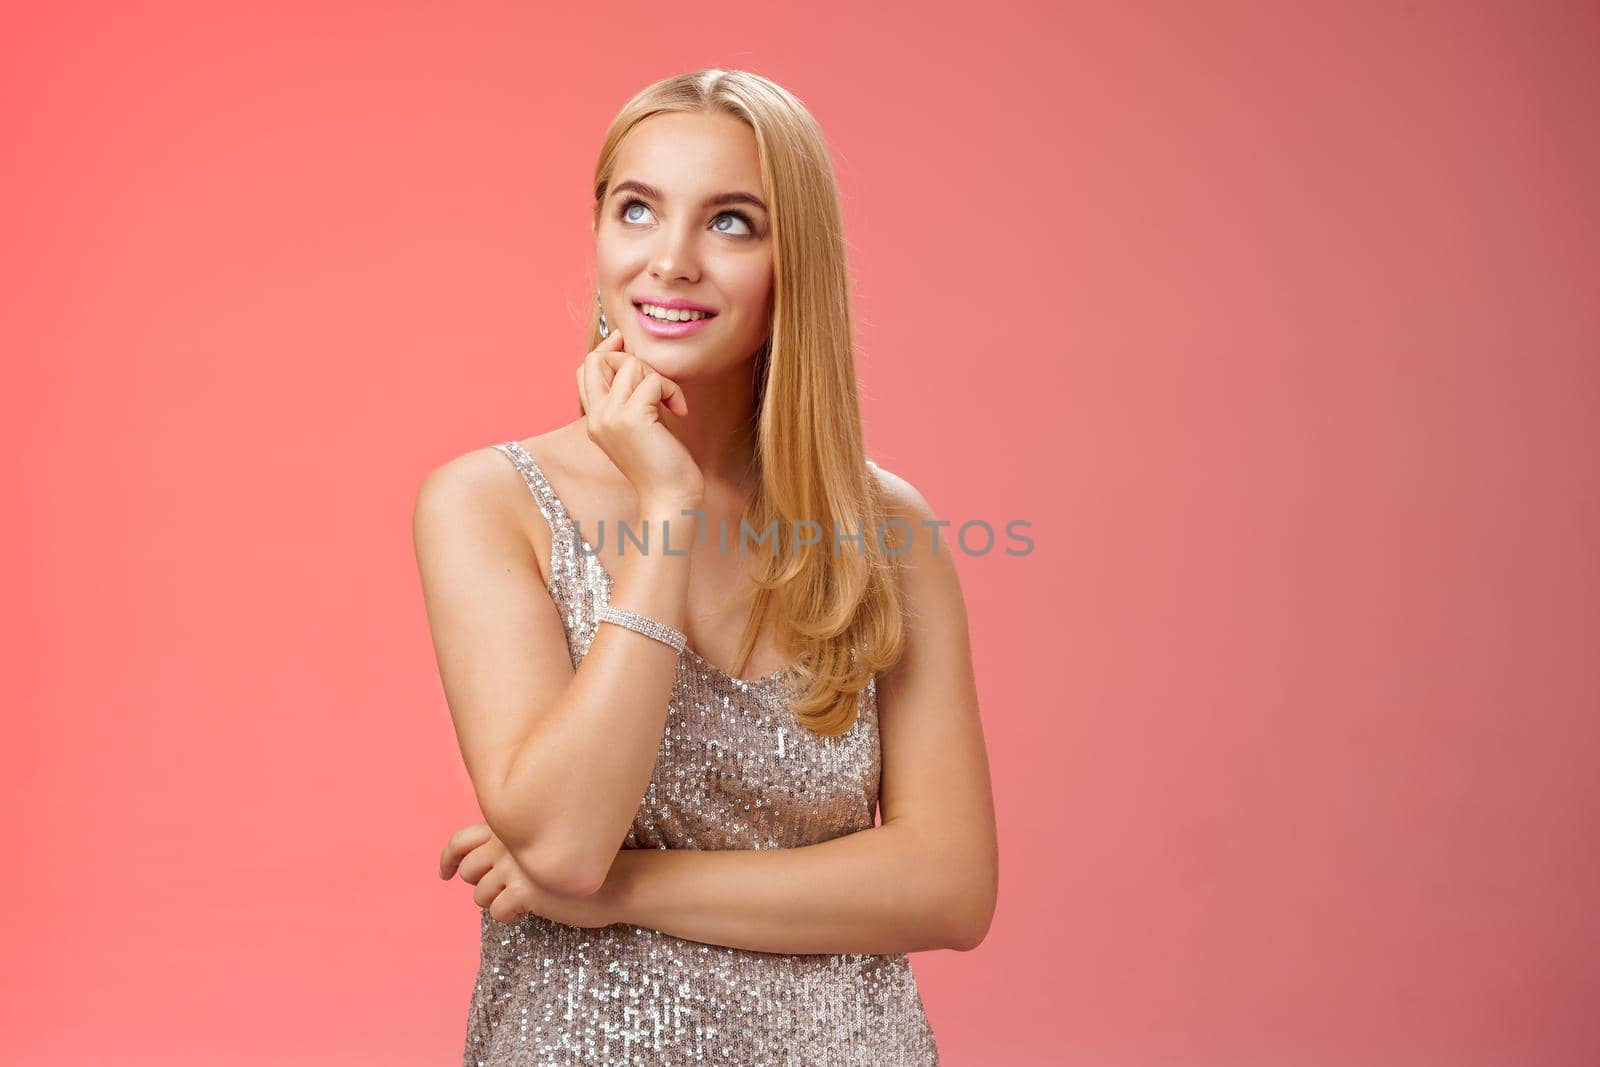 Lifestyle. Dreamy charming elegant blond young woman in silver glittering evening dress look up thoughtful enjoying fashion week afterparty standing casually relaxed red background thinking planning mind.